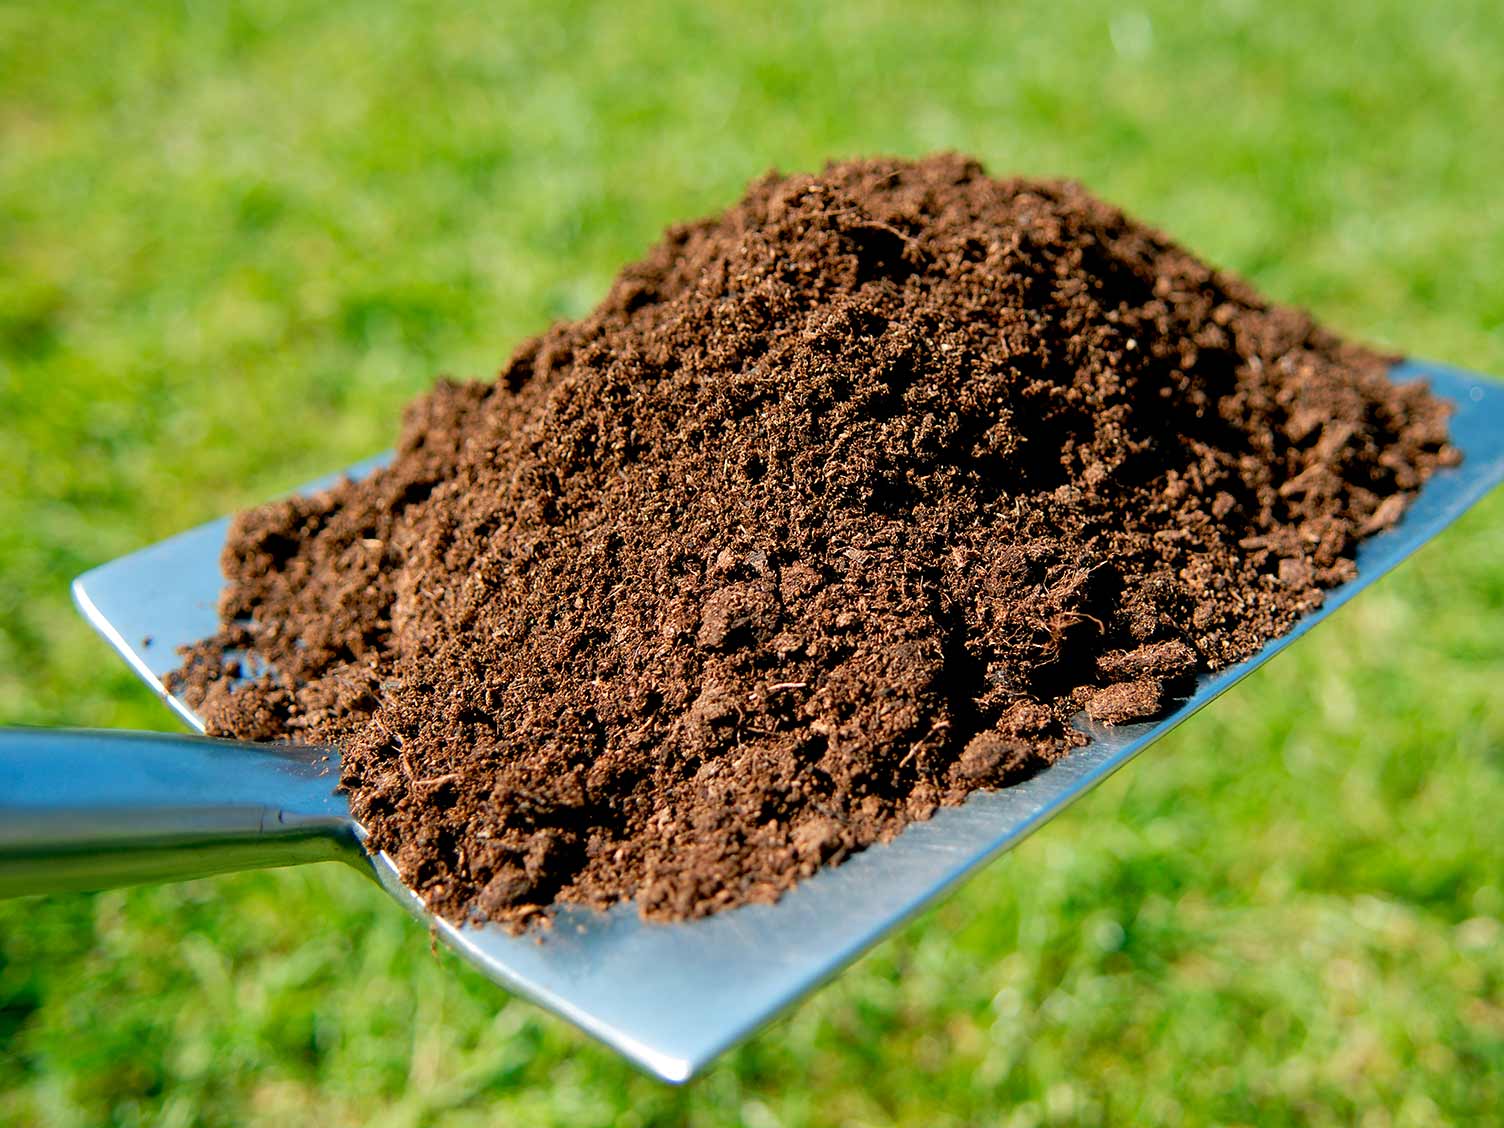  Top dressing a lawn: how and why